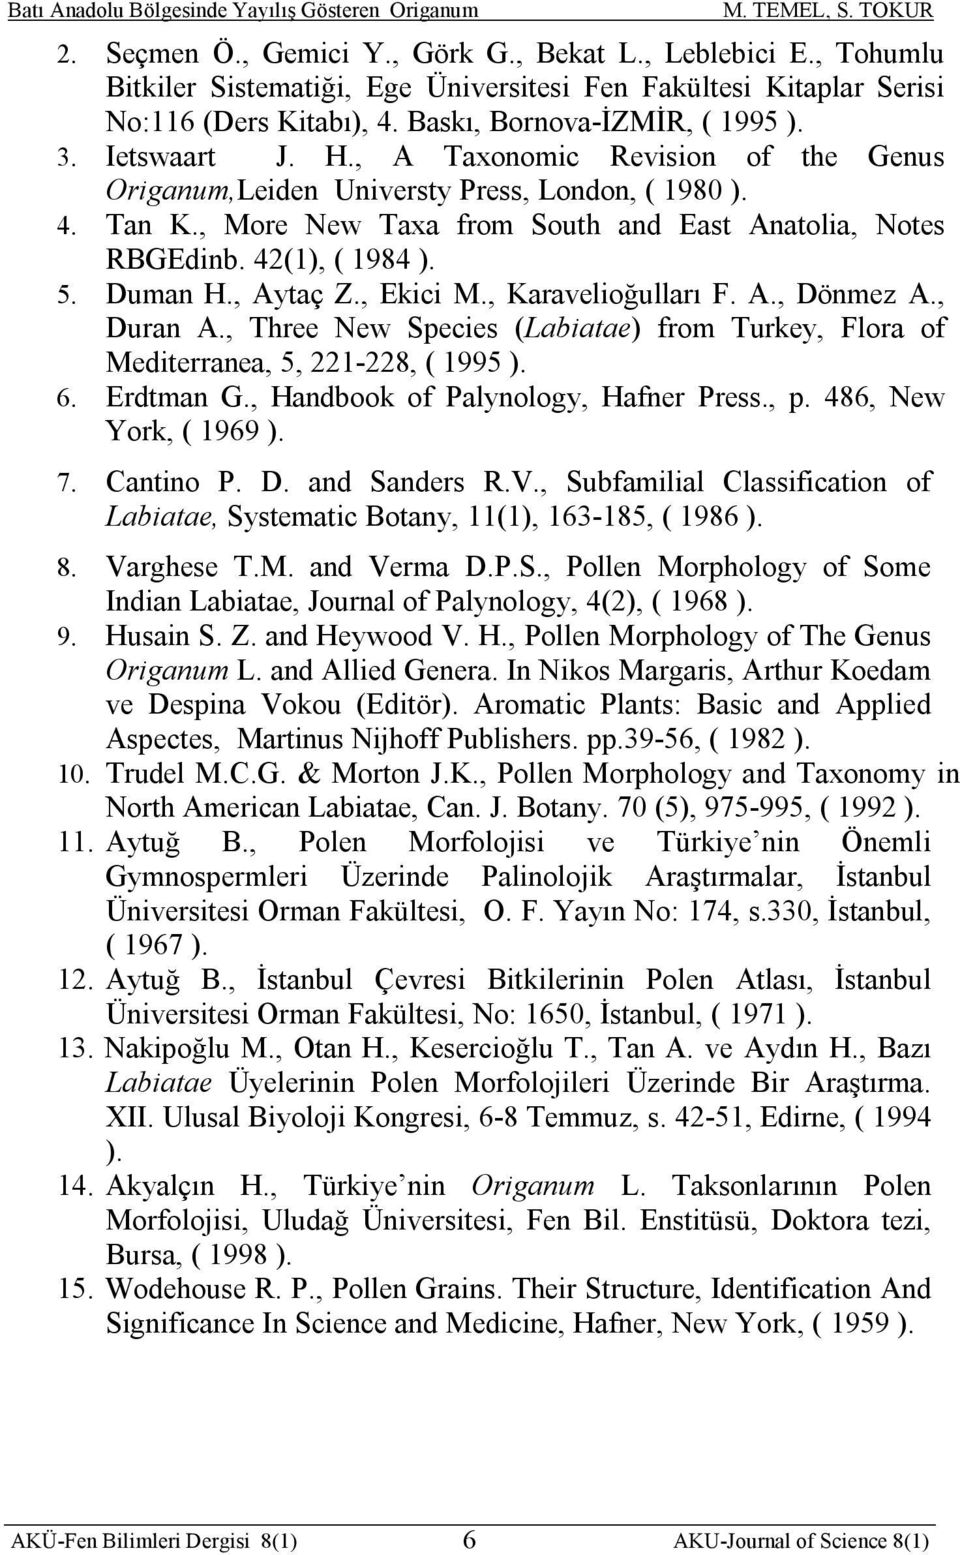 , A Taxonomic Revision of the Genus Origanum,Leiden Universty Press, London, ( 980 ). 4. Tan K., More New Taxa from South and East Anatolia, Notes RBGEdinb. 4(), ( 984 ). 5. Duman H., Aytaç Z.